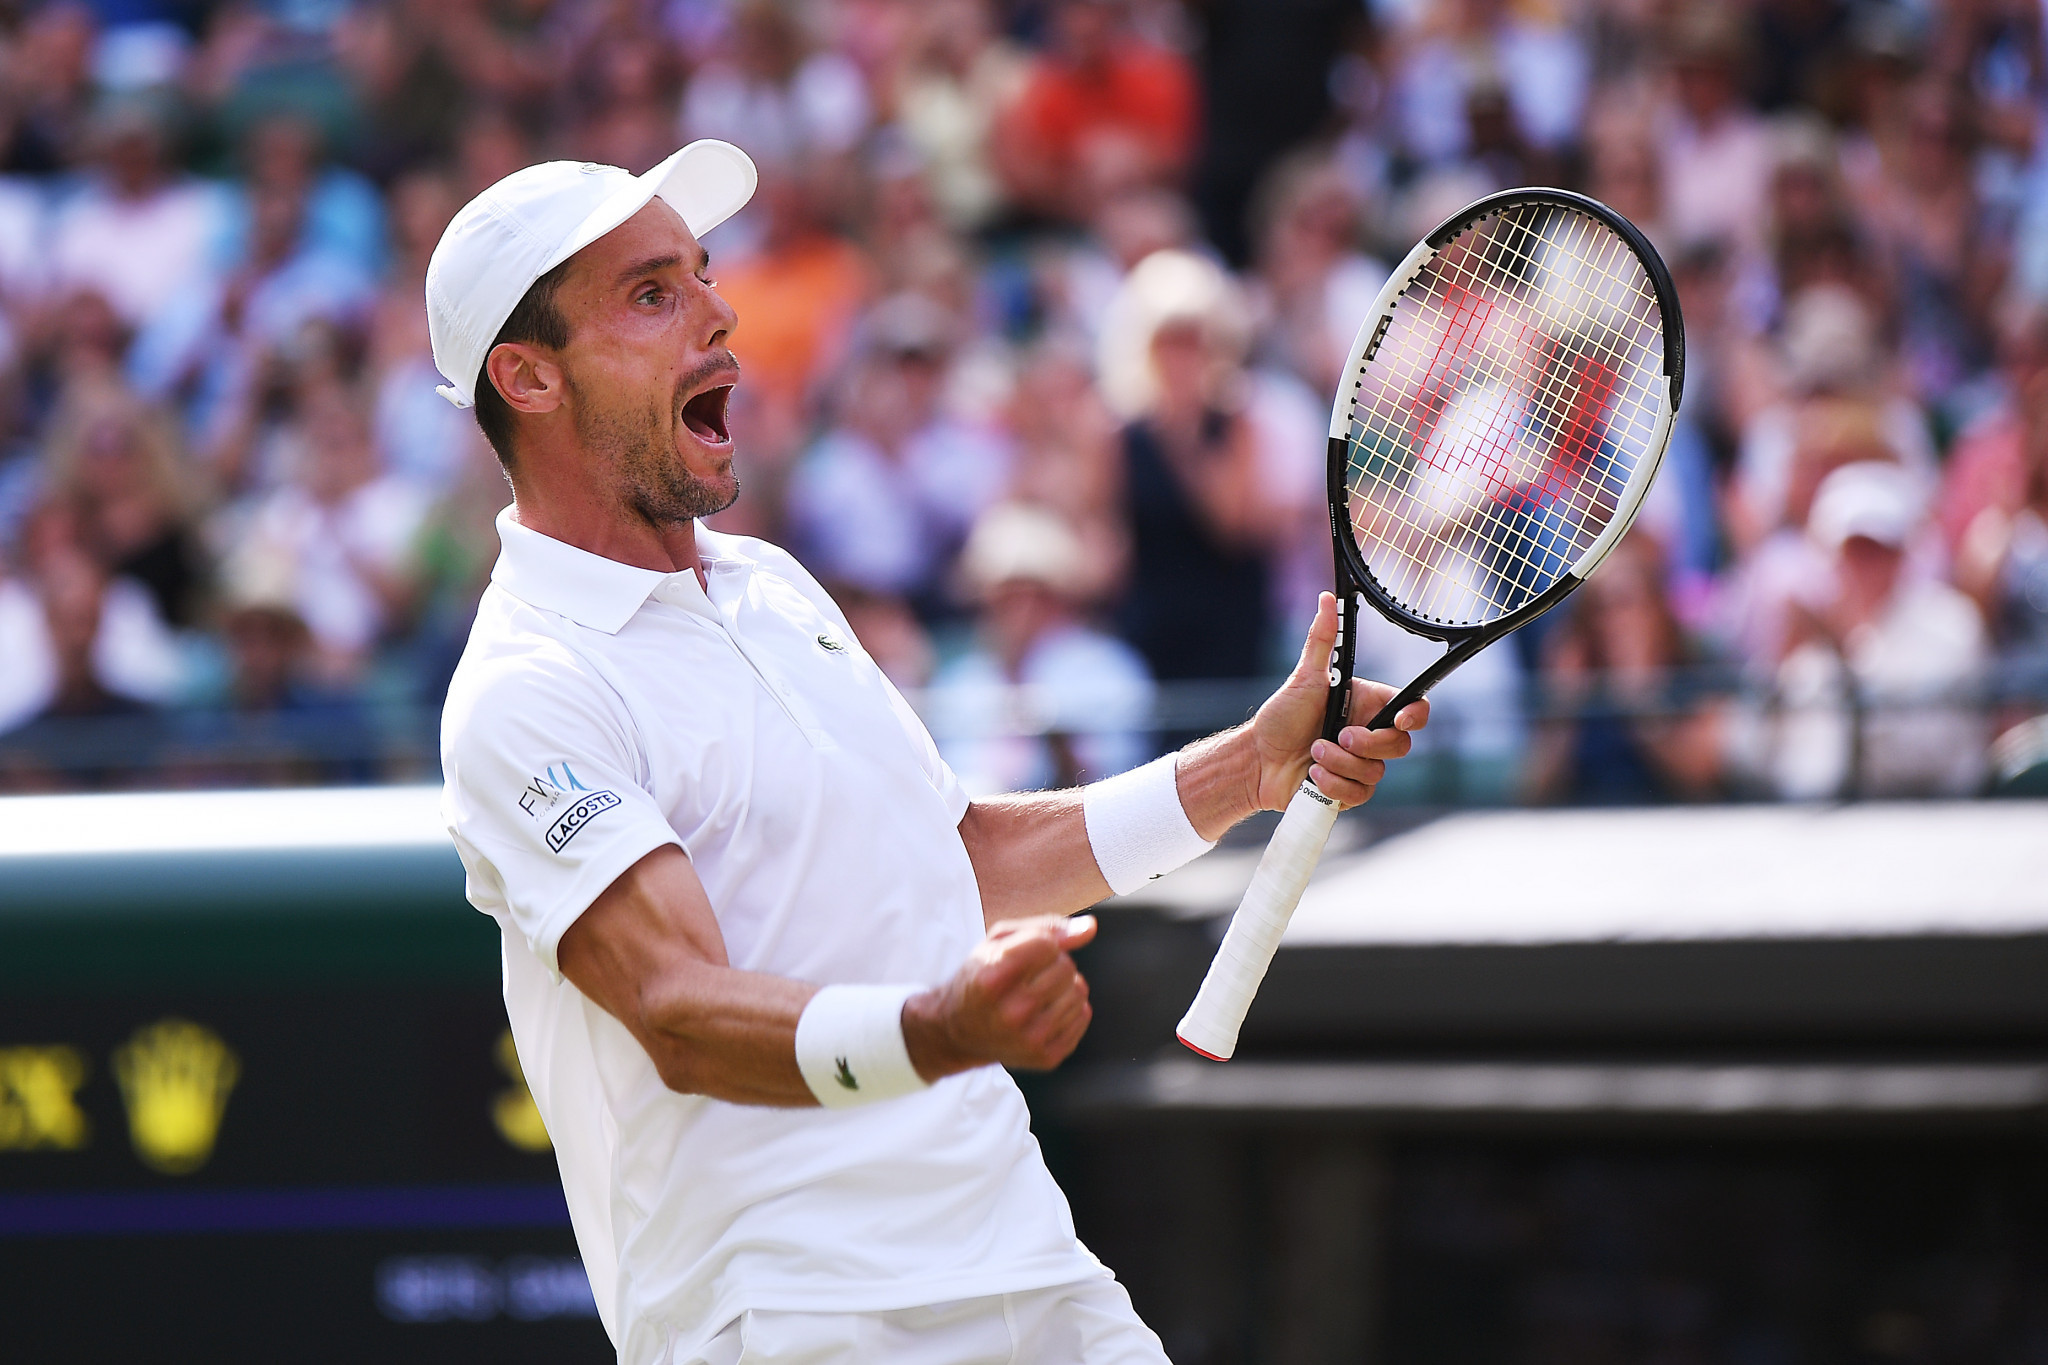 His opponent in the last four will be Spain's Roberto Bautista Agut, who is through to his first Grand Slam semi-final ©Getty Images